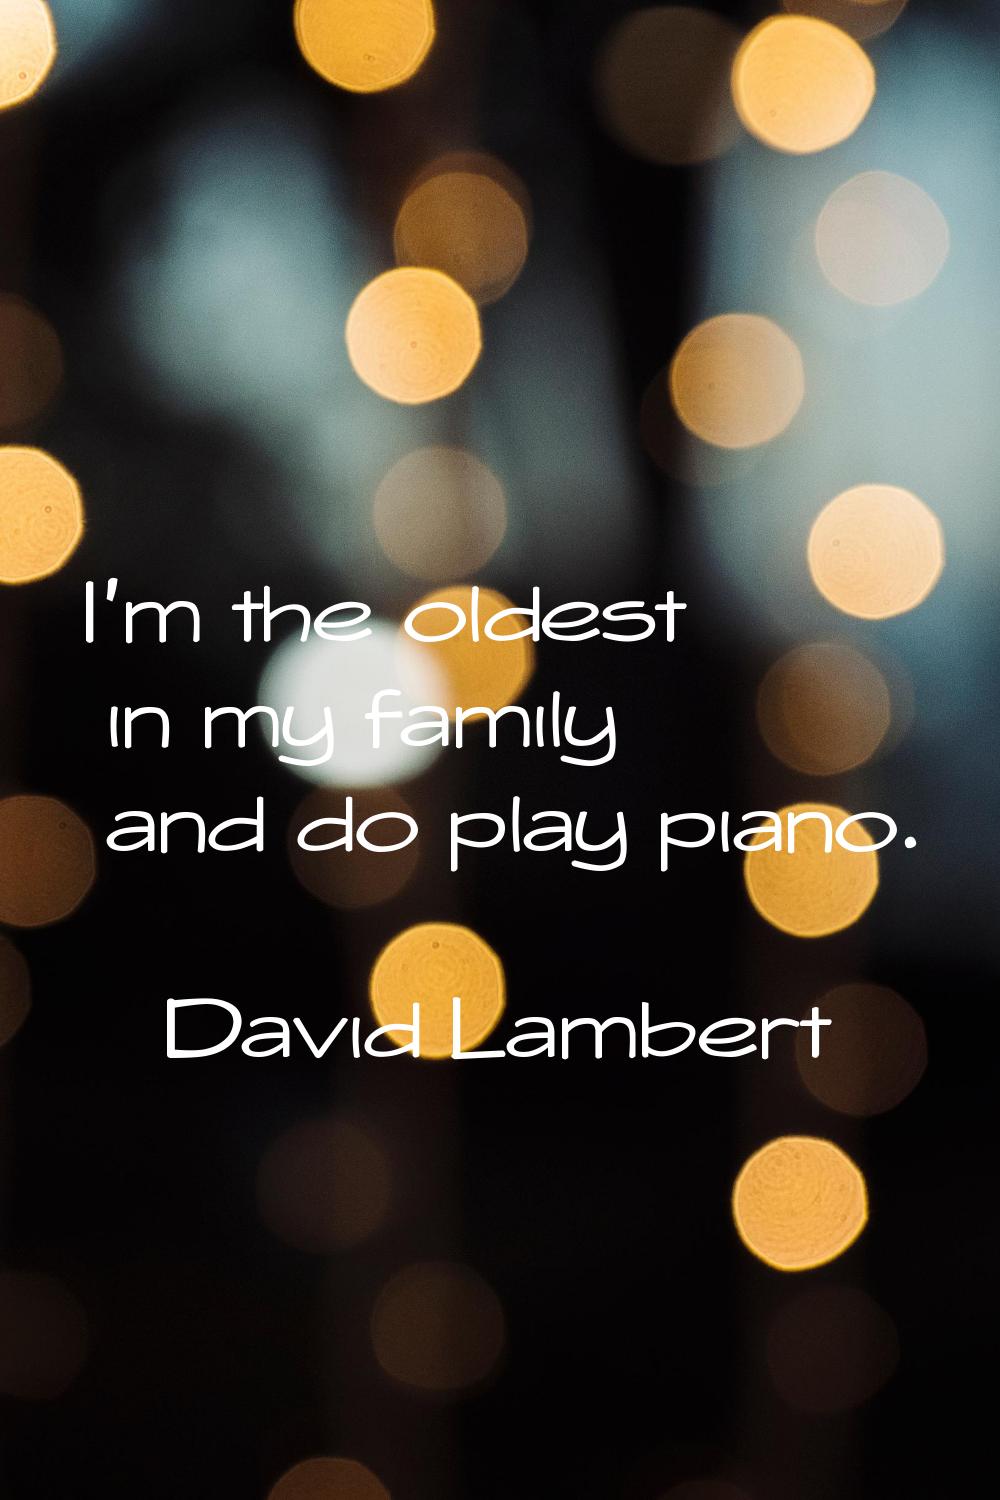 I'm the oldest in my family and do play piano.